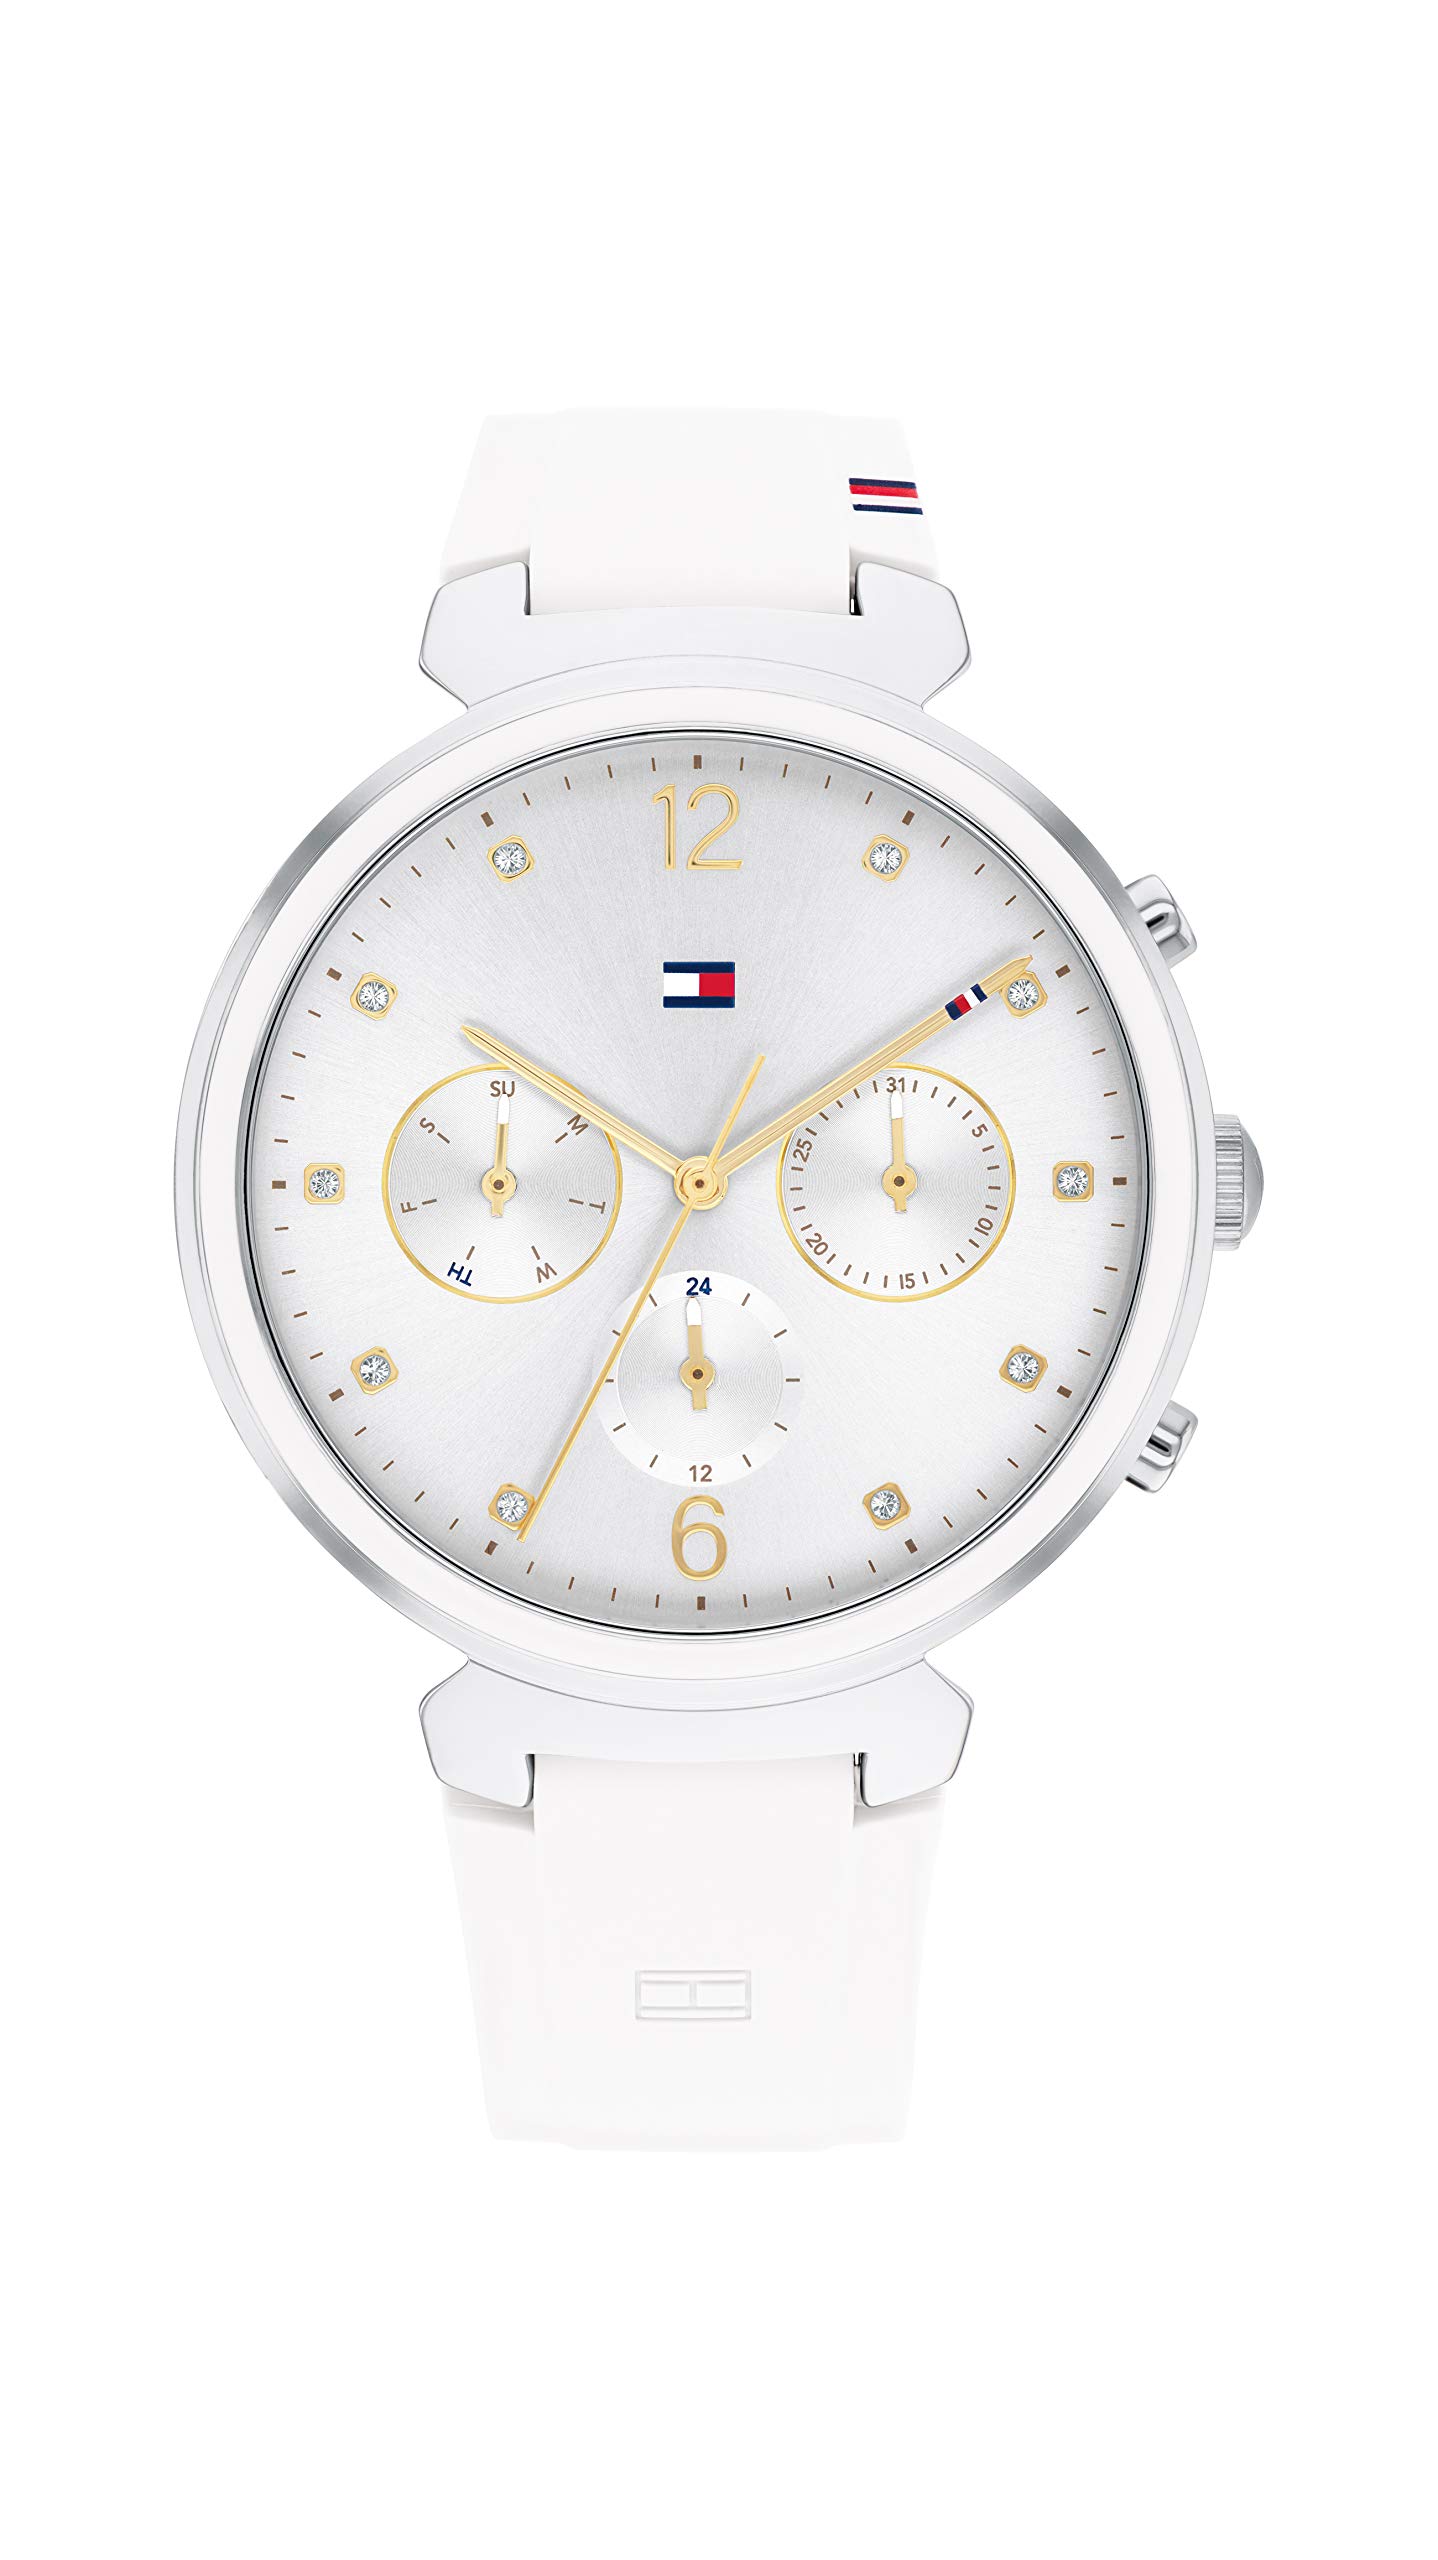 Tommy Hilfiger Women's Stainless Steel Quartz Watch with Silicone Strap, White, 12 (Model: 1782342)